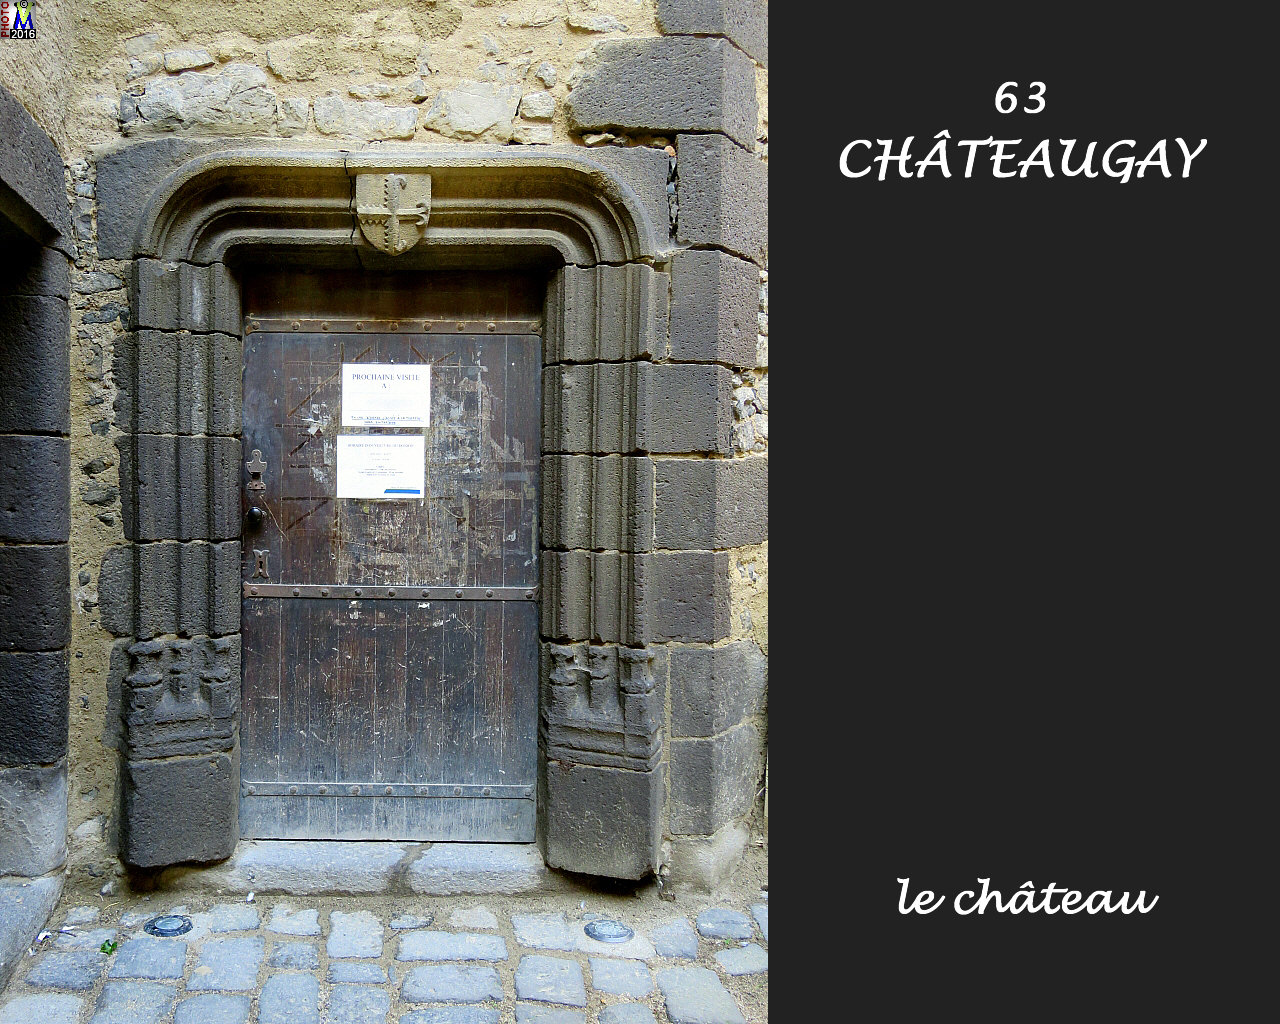 63CHATEAUGAY_chateau_114.jpg